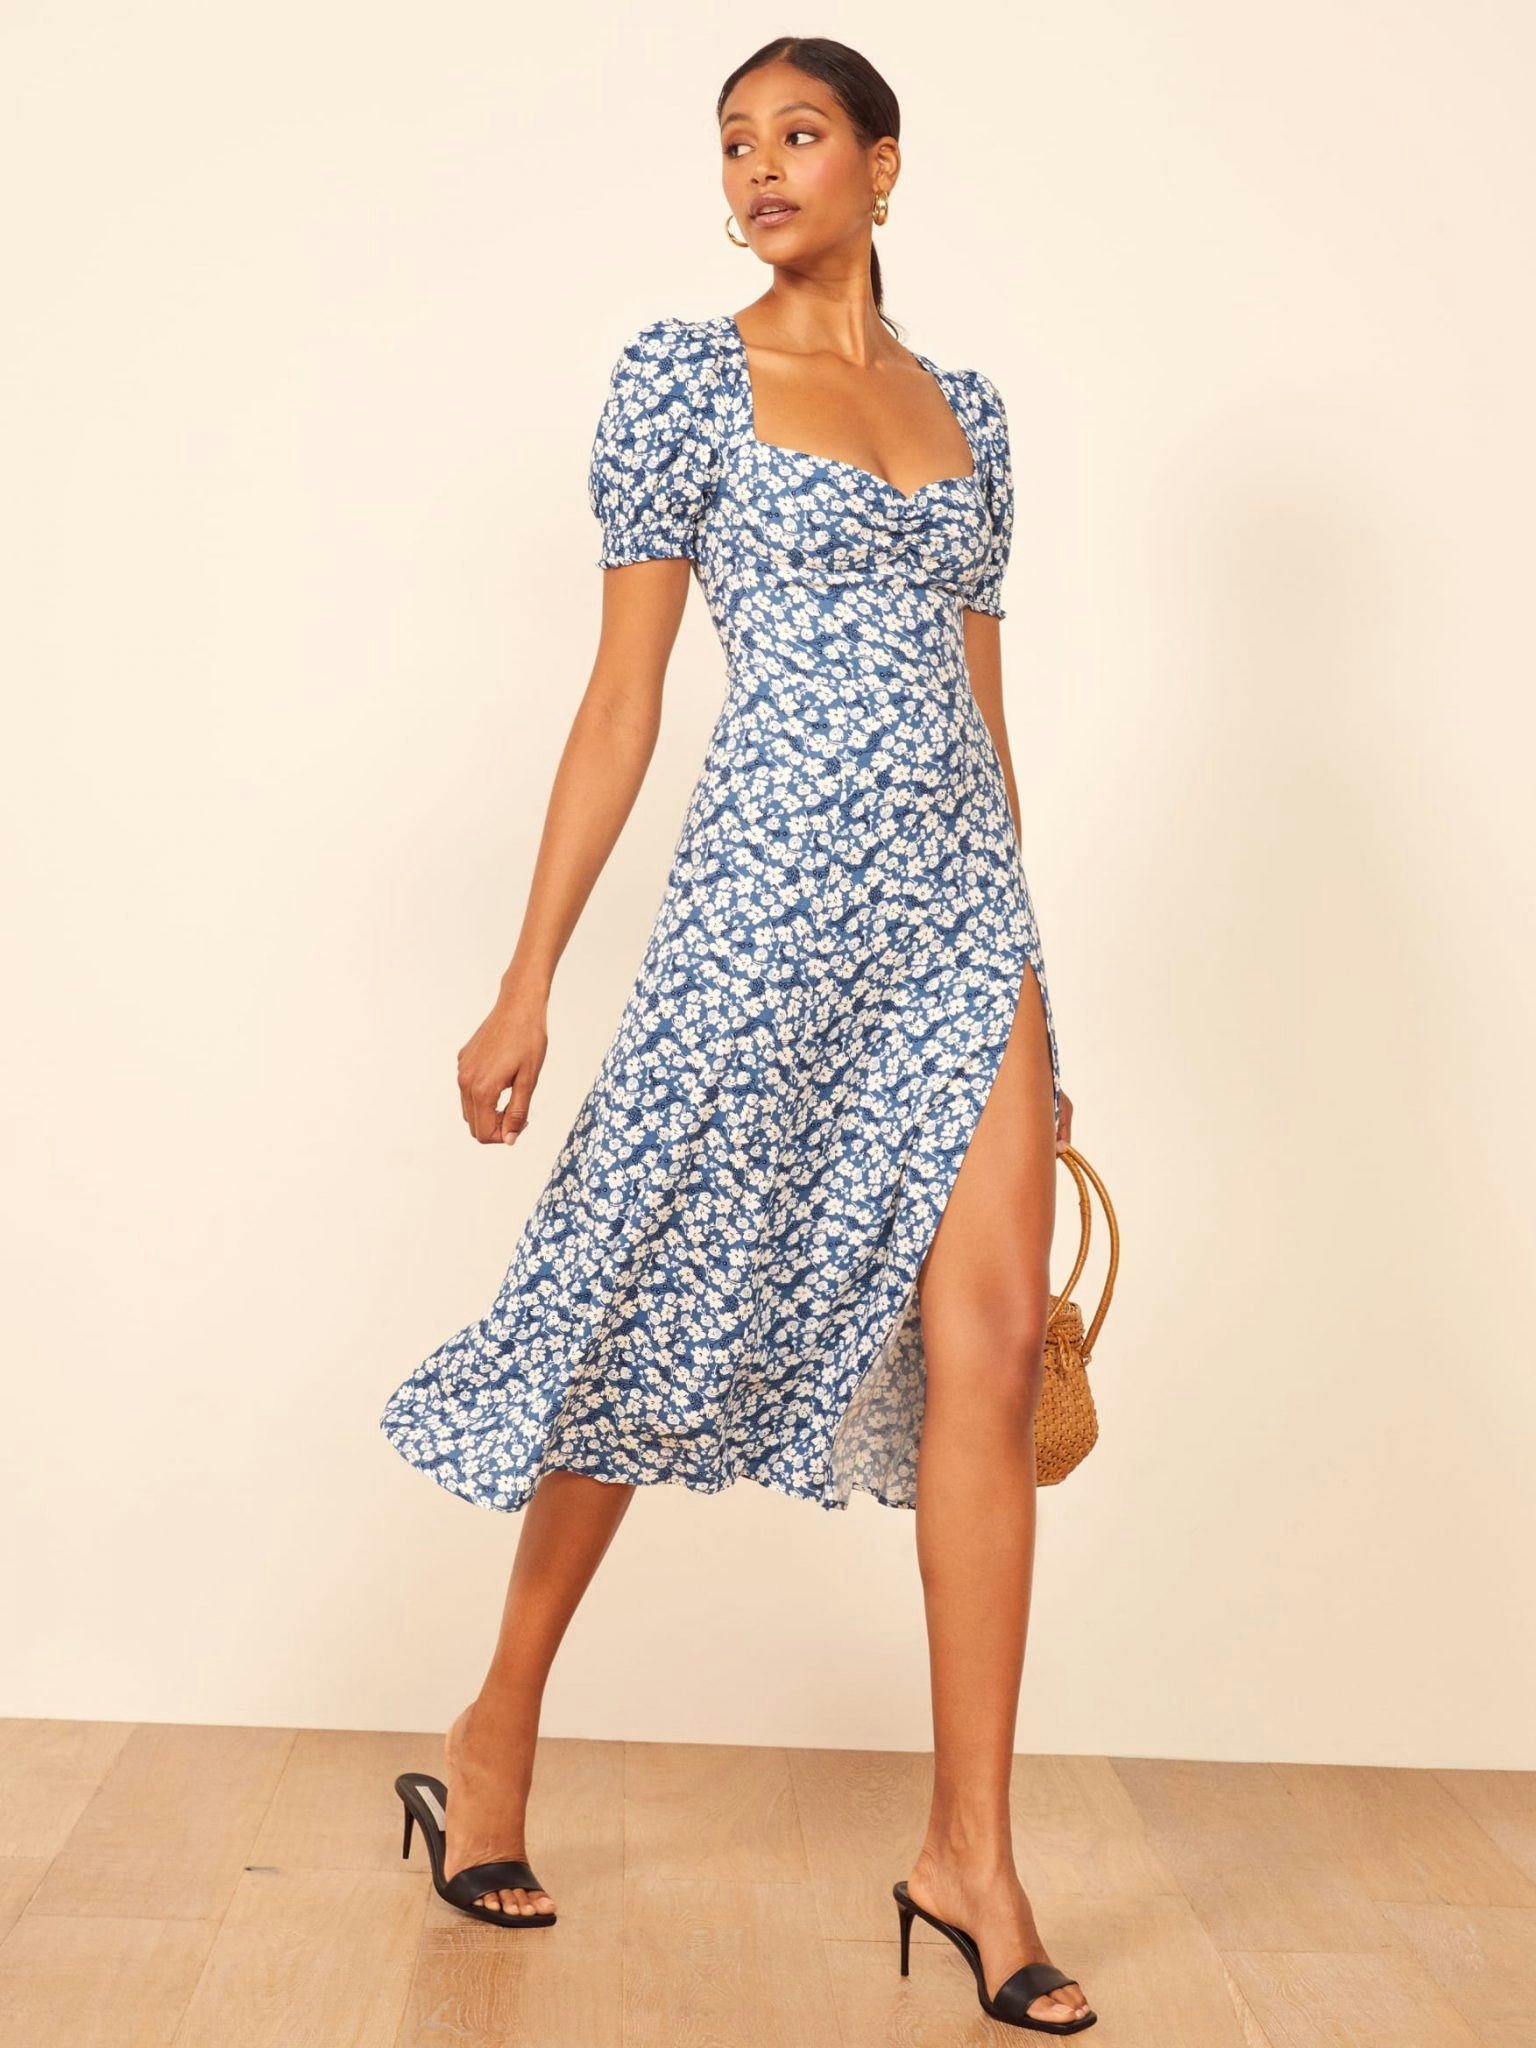 Reformation's midi dress has gone viral ...